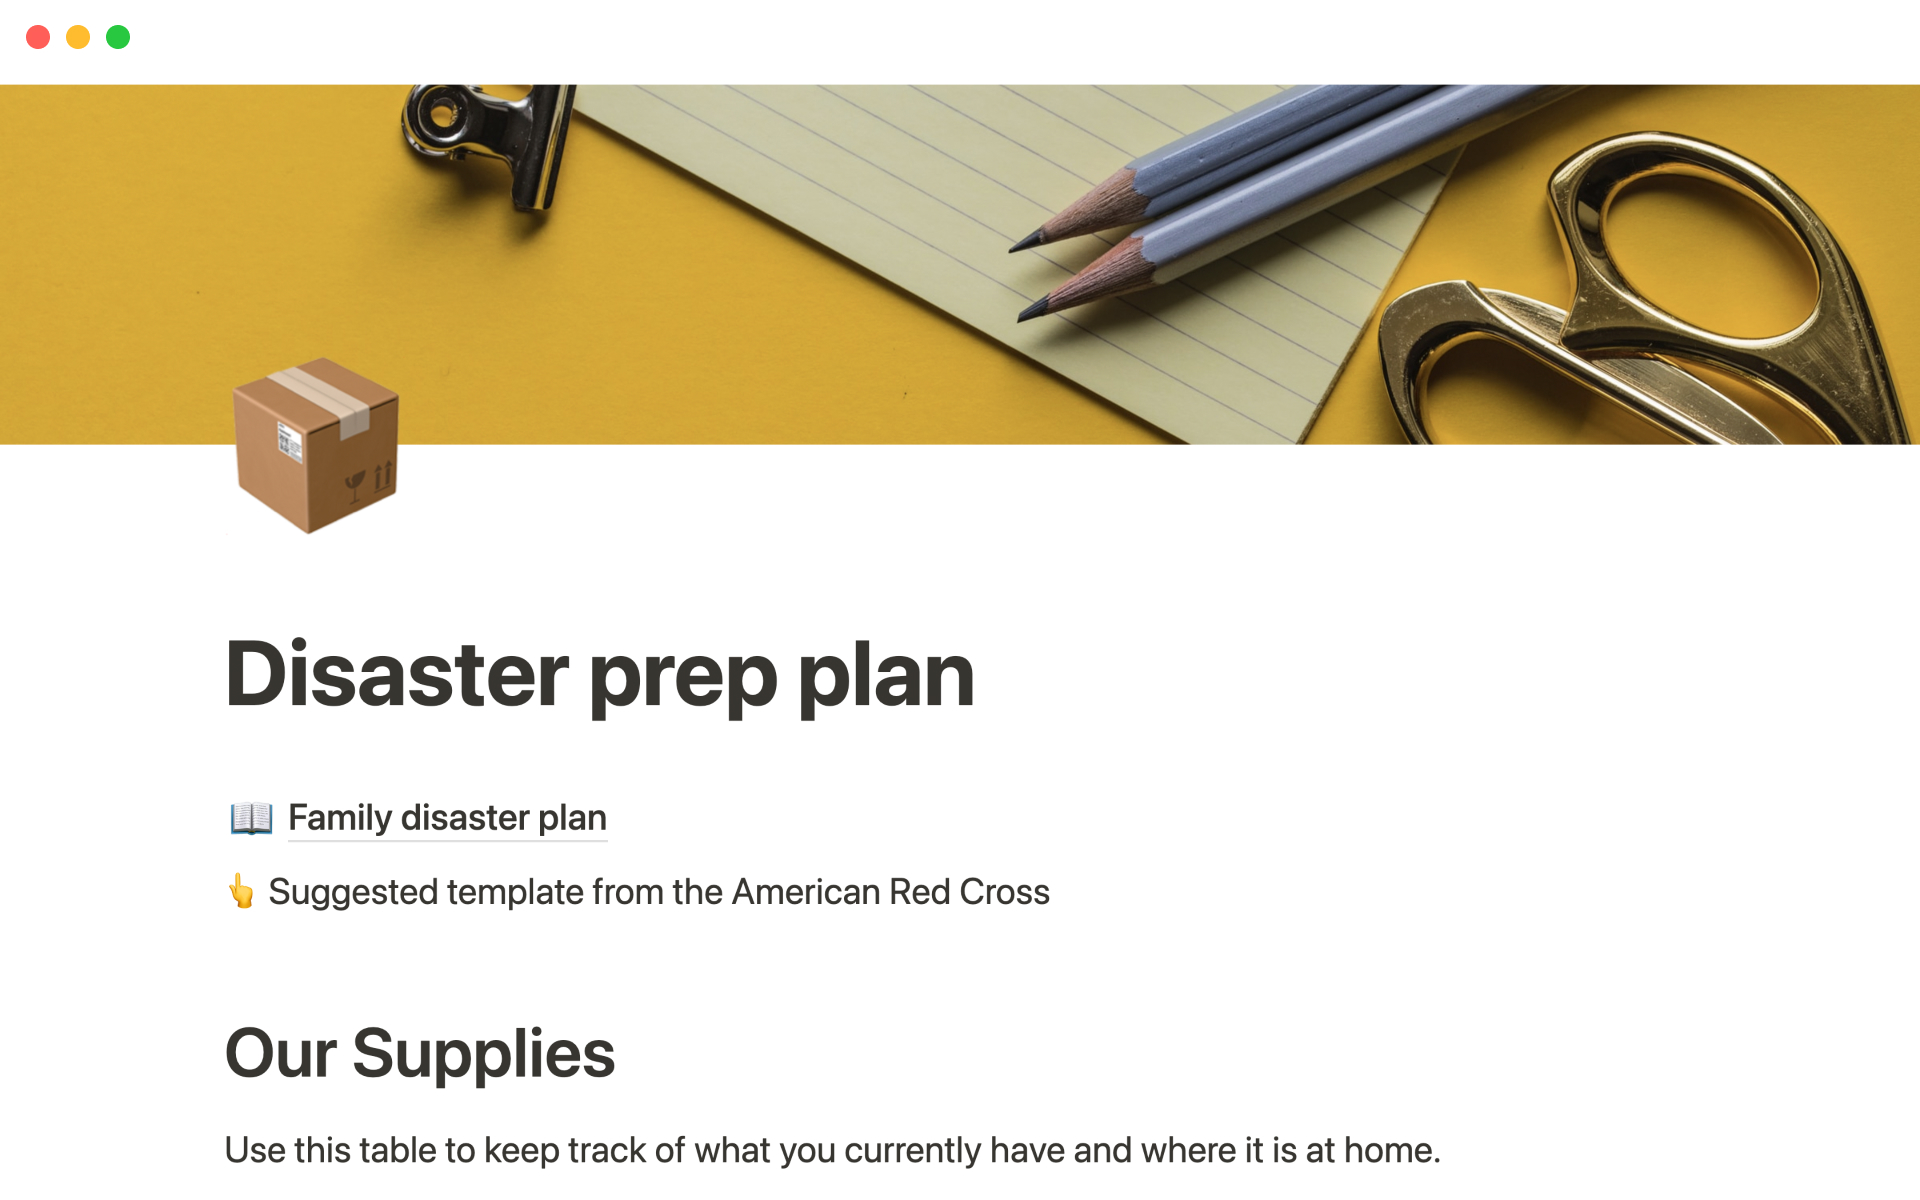 Templates and checklists recommended by the American Red Cross to help you  in the event of a disaster.